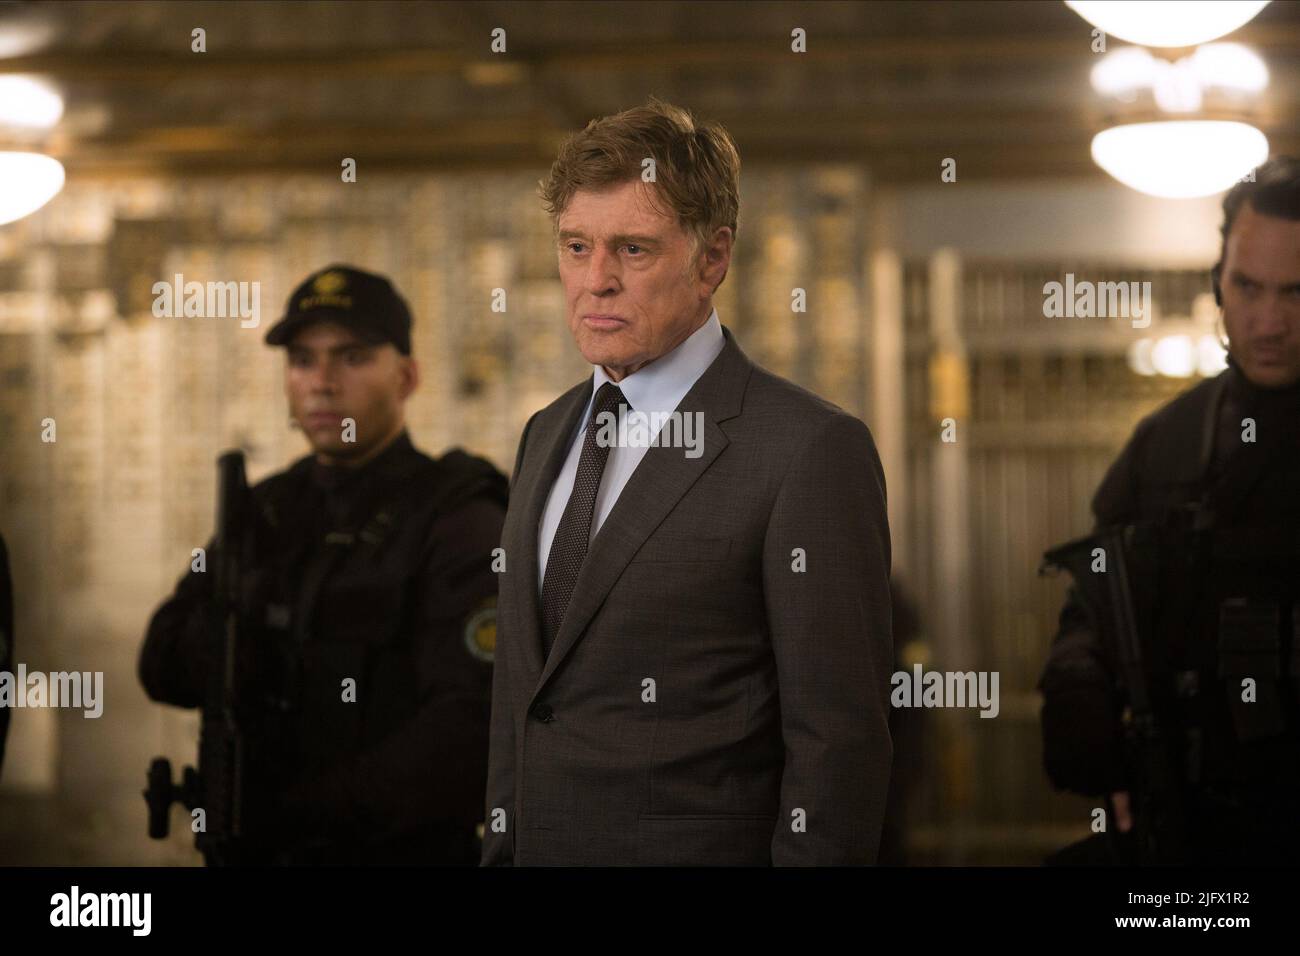 ROBERT REDFORD, CAPTAIN AMERICA: THE WINTER SOLDIER, 2014 Stock Photo